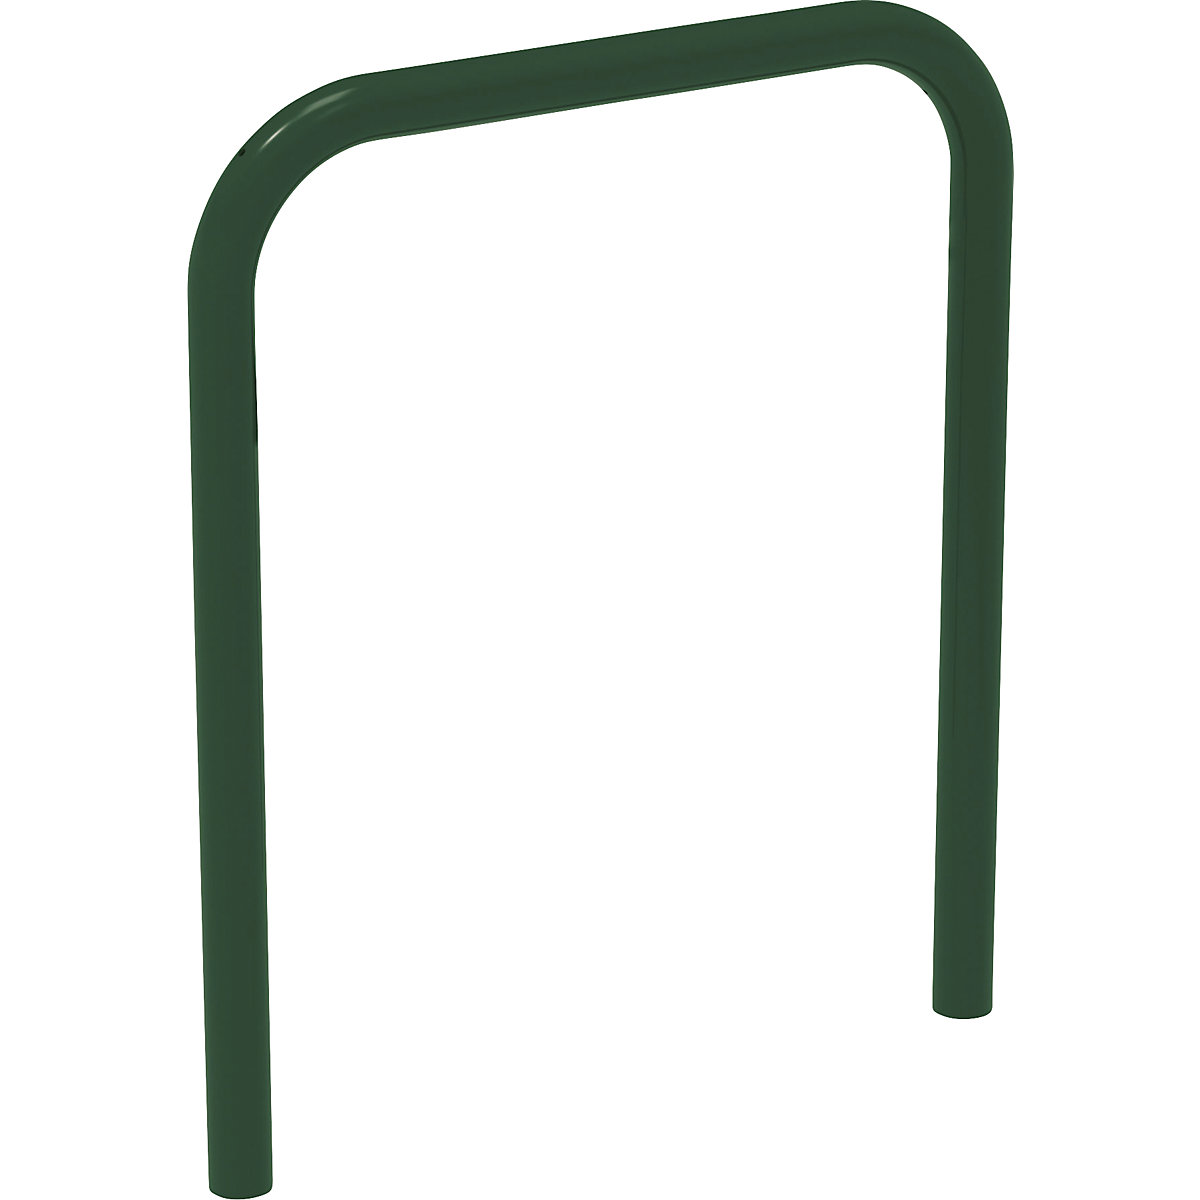 Bicycle parking rail – PROCITY, for concreting in, moss green-3